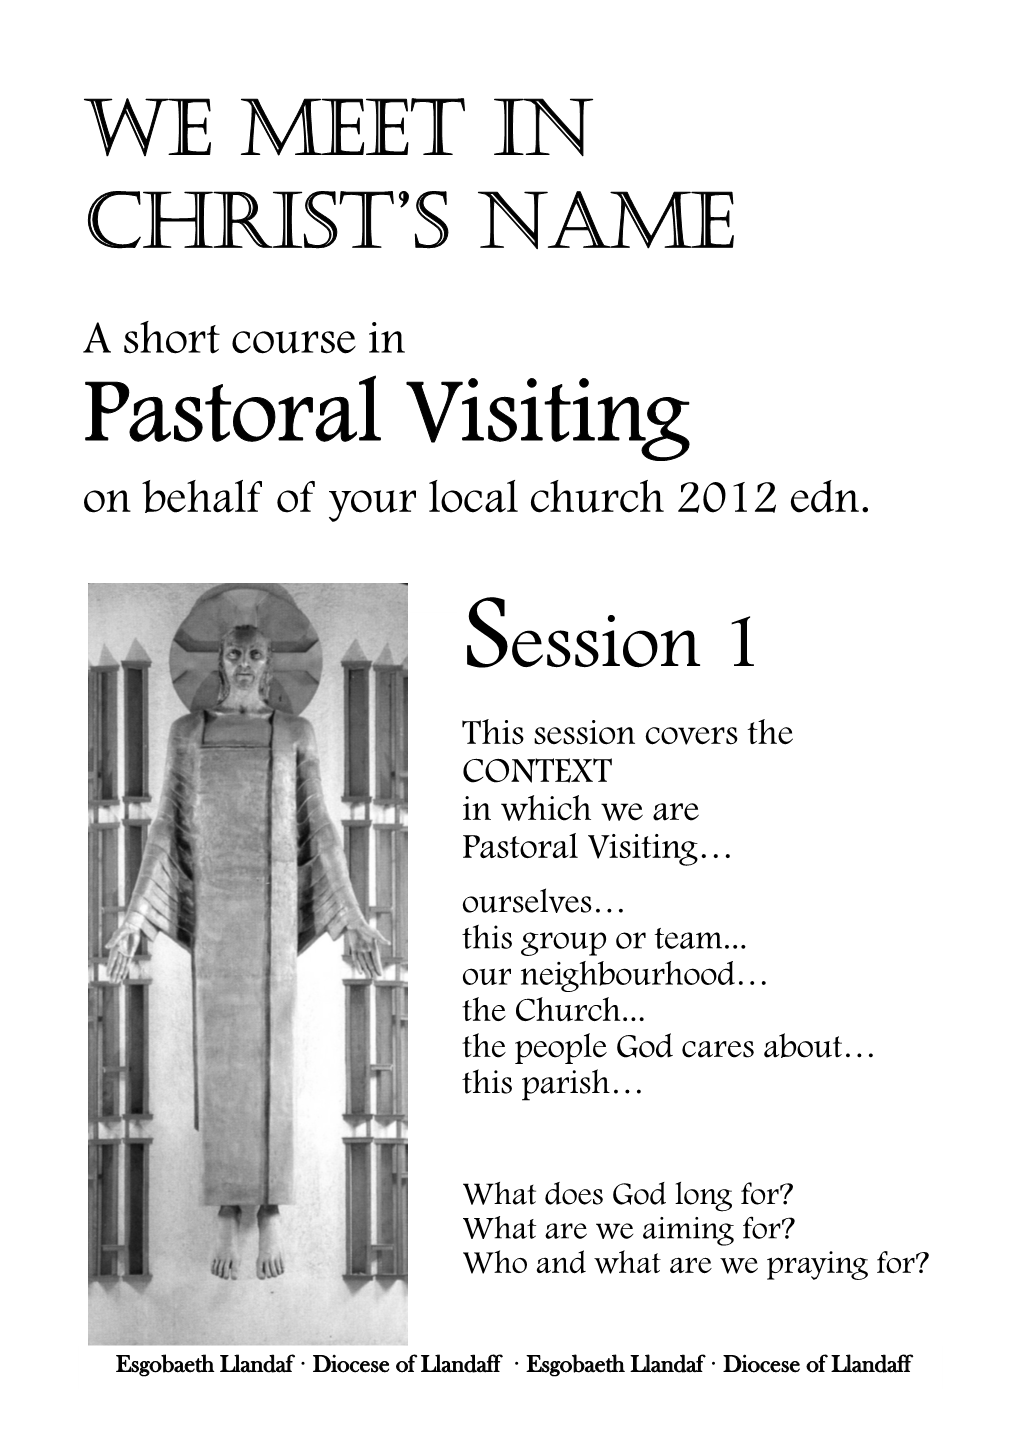 Pastoral Visiting on Behalf of Your Local Church 2012 Edn